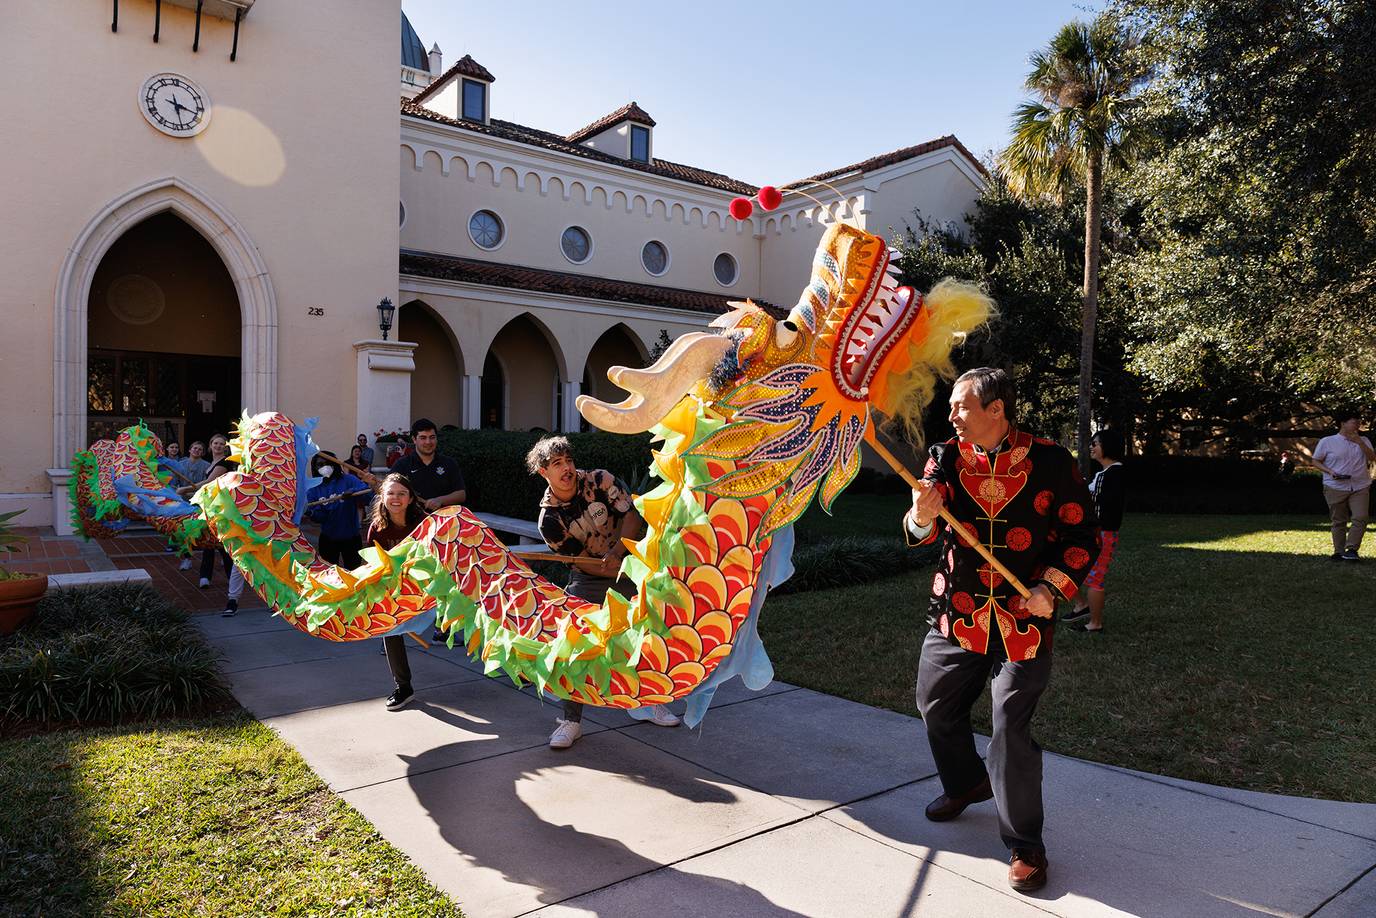 Rollins professors and students do the Chinese Dragon Dance in celebration of the Lunar New Year.